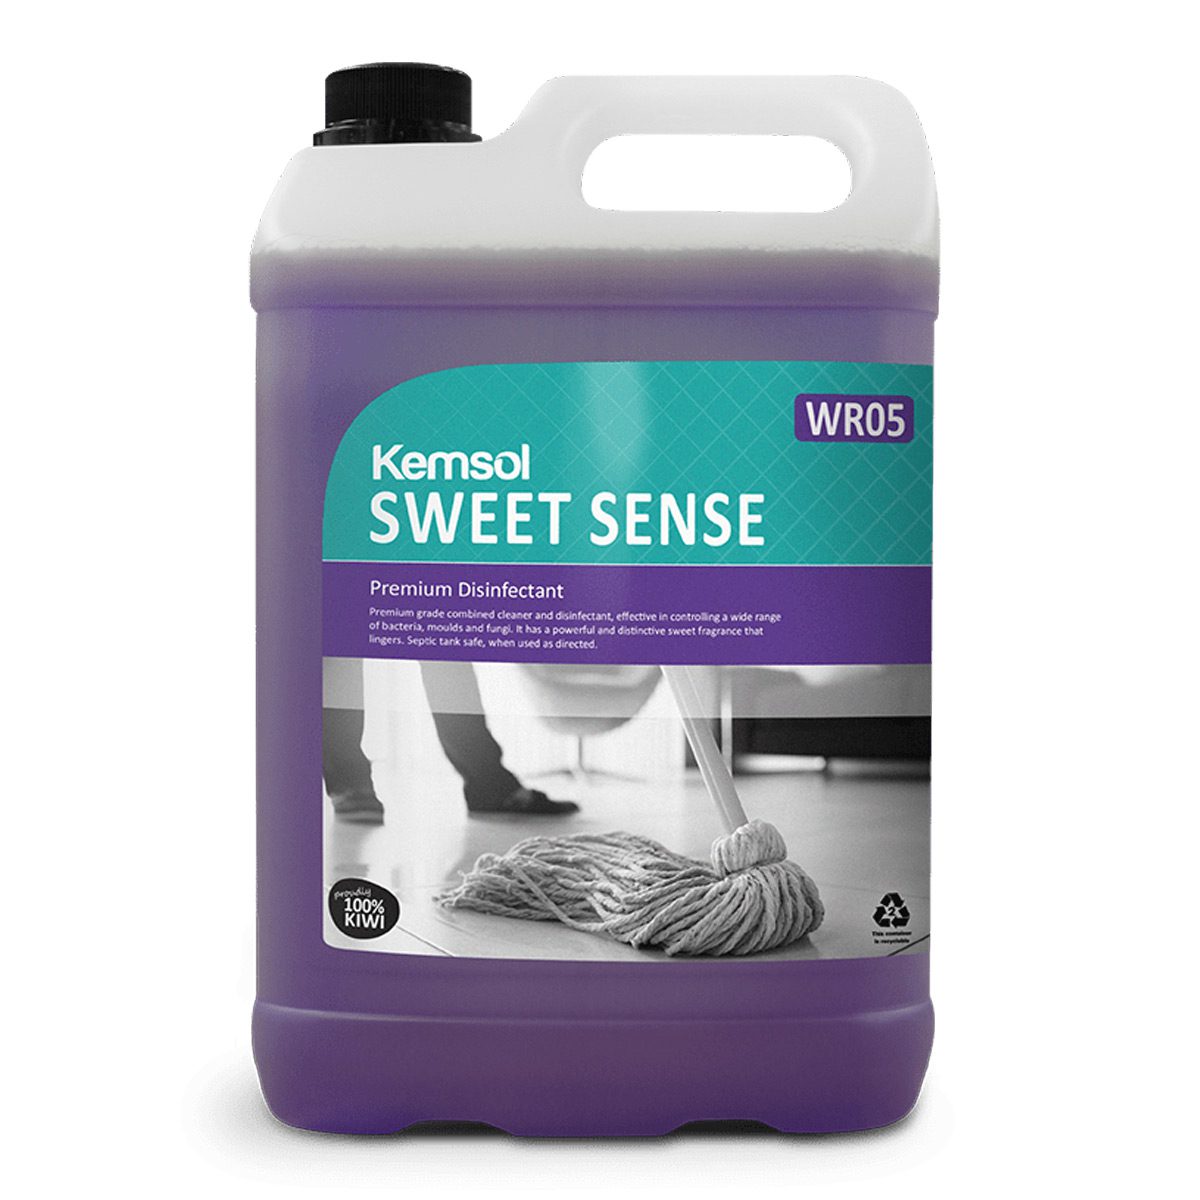 cleaning-products-disinfectants-and-sanitisers-kemsol-sweet-sense-disinfectant-premium-grade-janitorial-and-washroom-disinfectant-septic-tank-safe-pine fragrance-vjs-distributors-KSWEETSKU